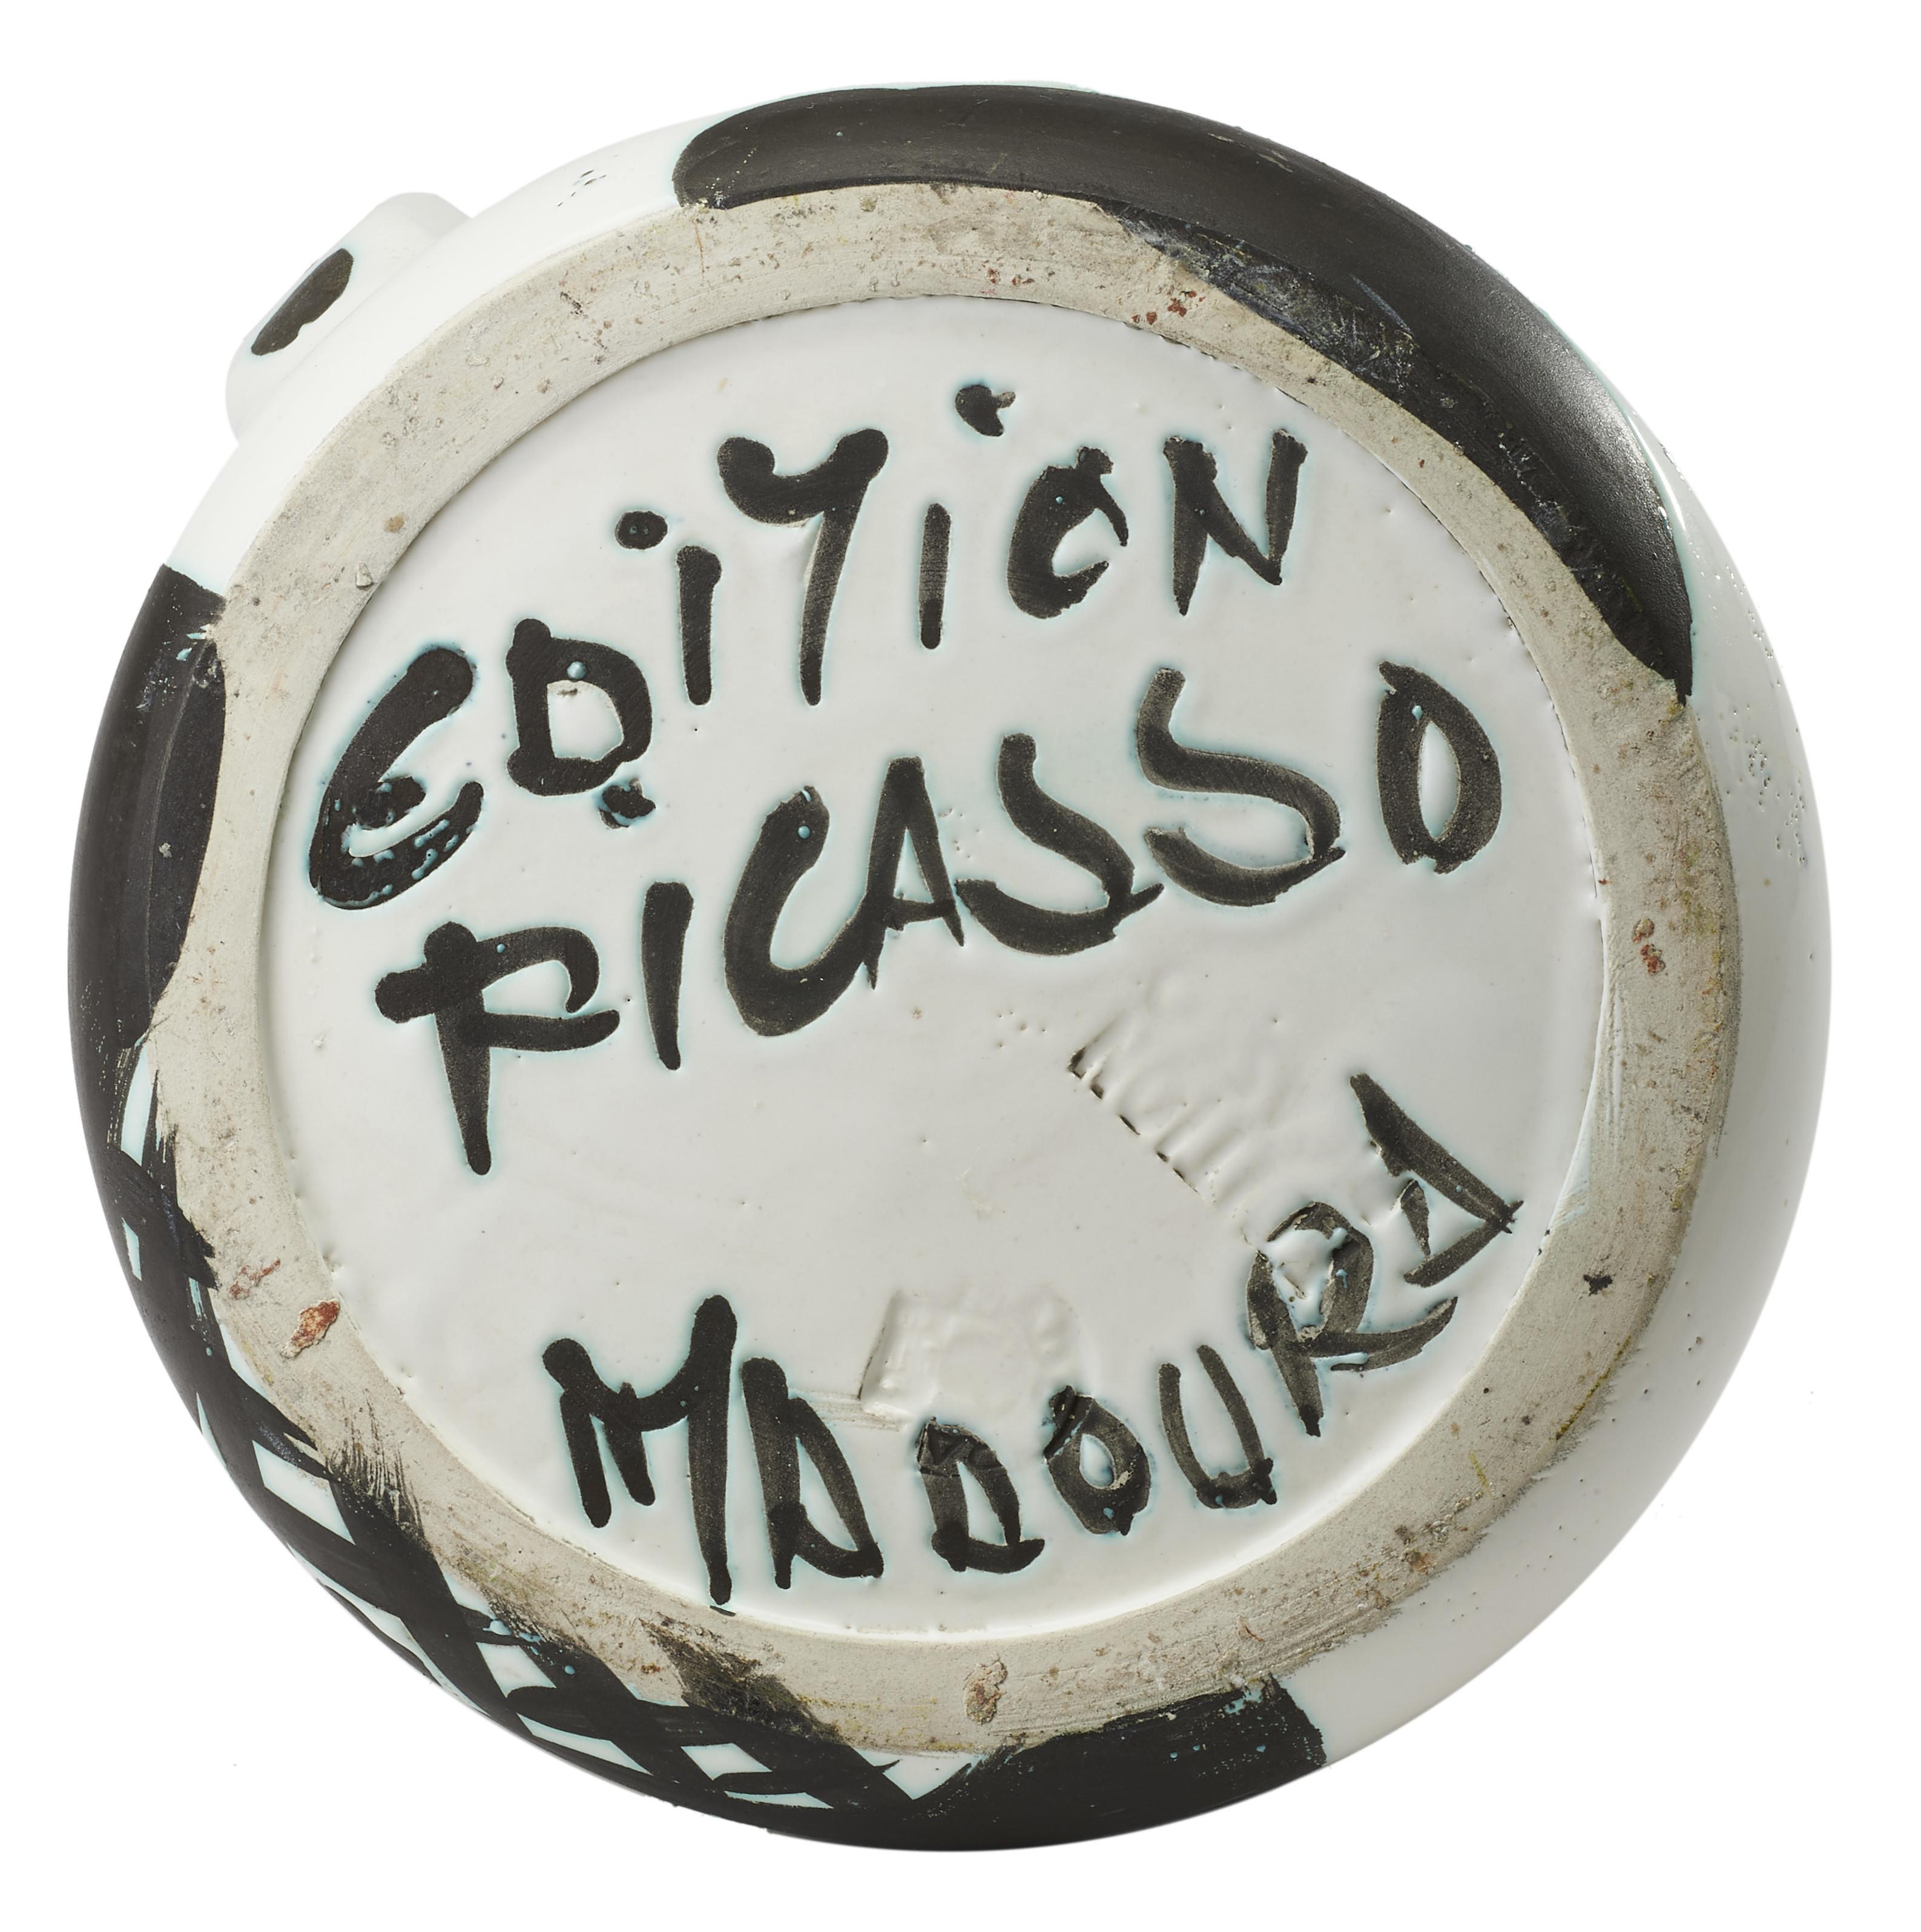 Ceramic pitcher partially glazed and painted, Edited in 1956
Limited Edition of 500 pieces
with the Edition Picasso and Madoura stamps
size: 13 x 15 x 15 cm
Excellent conditions

Bibliography: A. Ramié, Picasso. Catalogue de l’oeuvre céramique